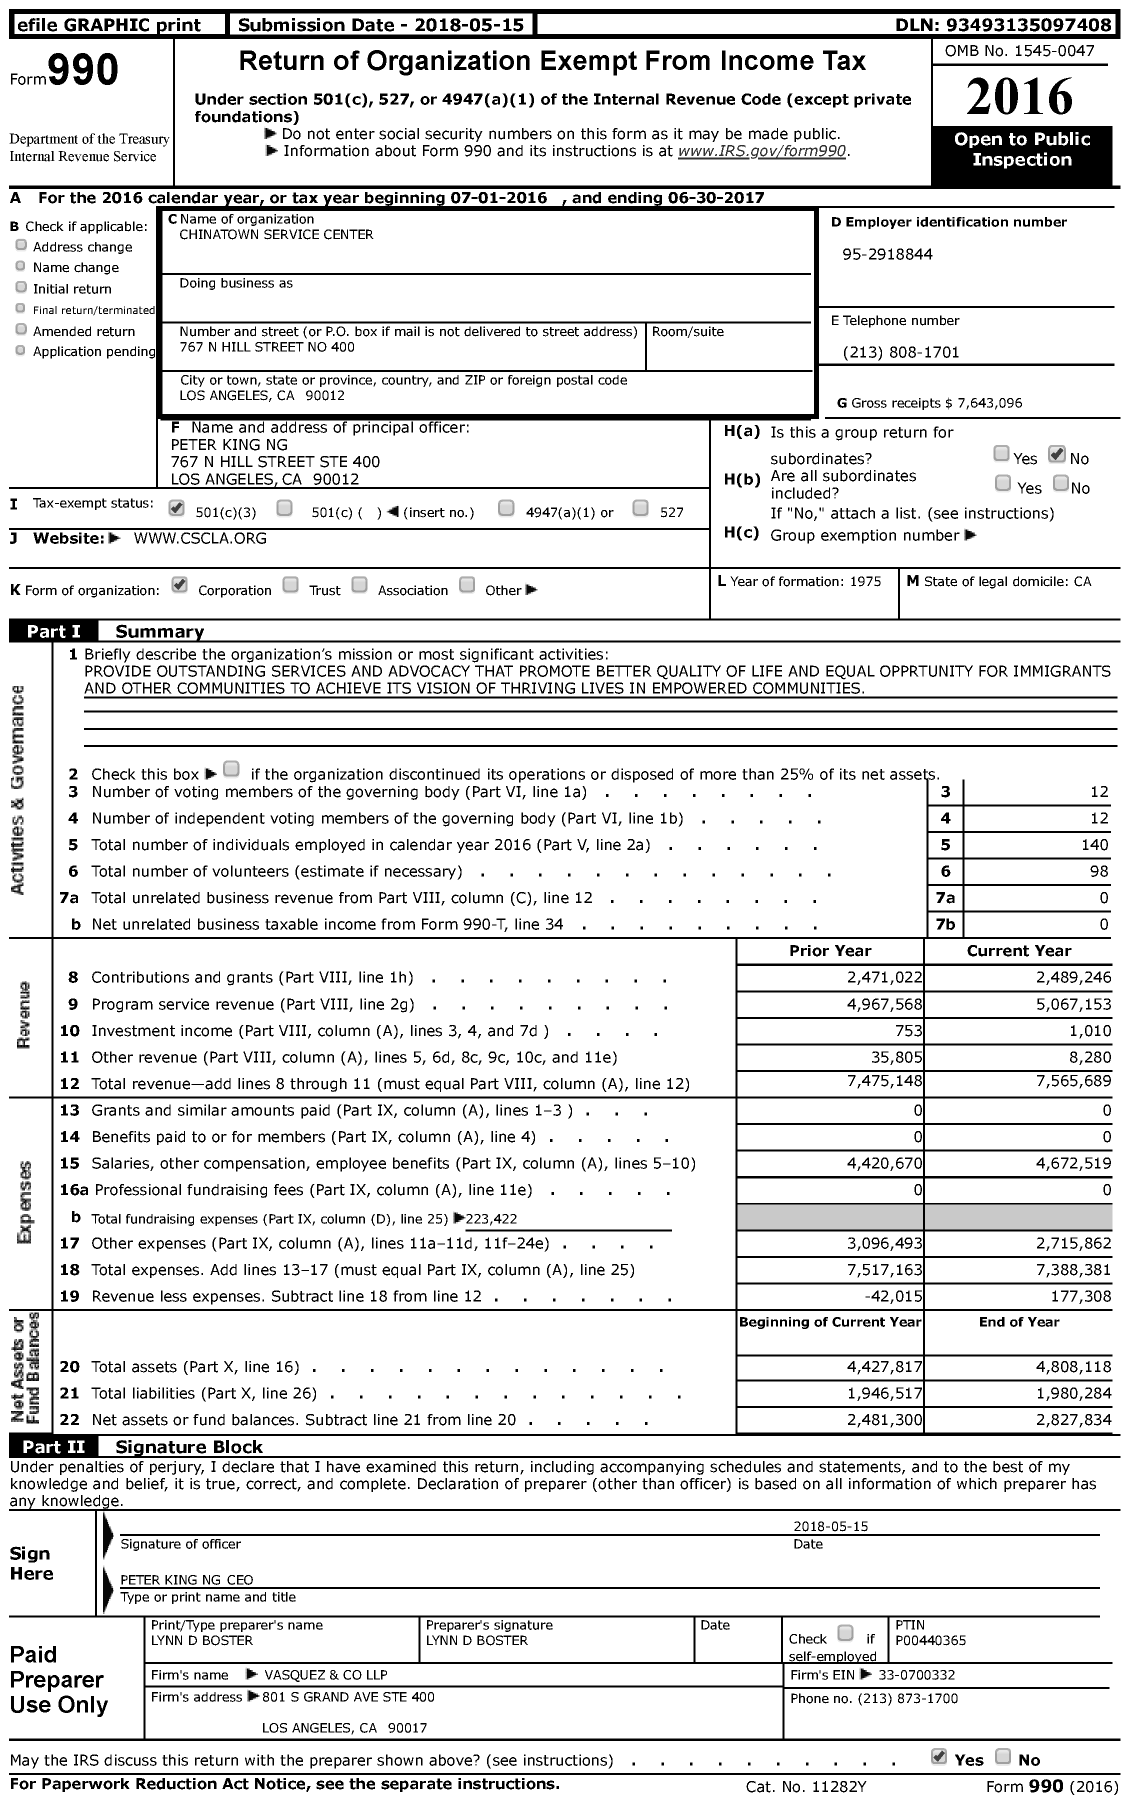 Image of first page of 2016 Form 990 for Chinatown Service Center (CSC)